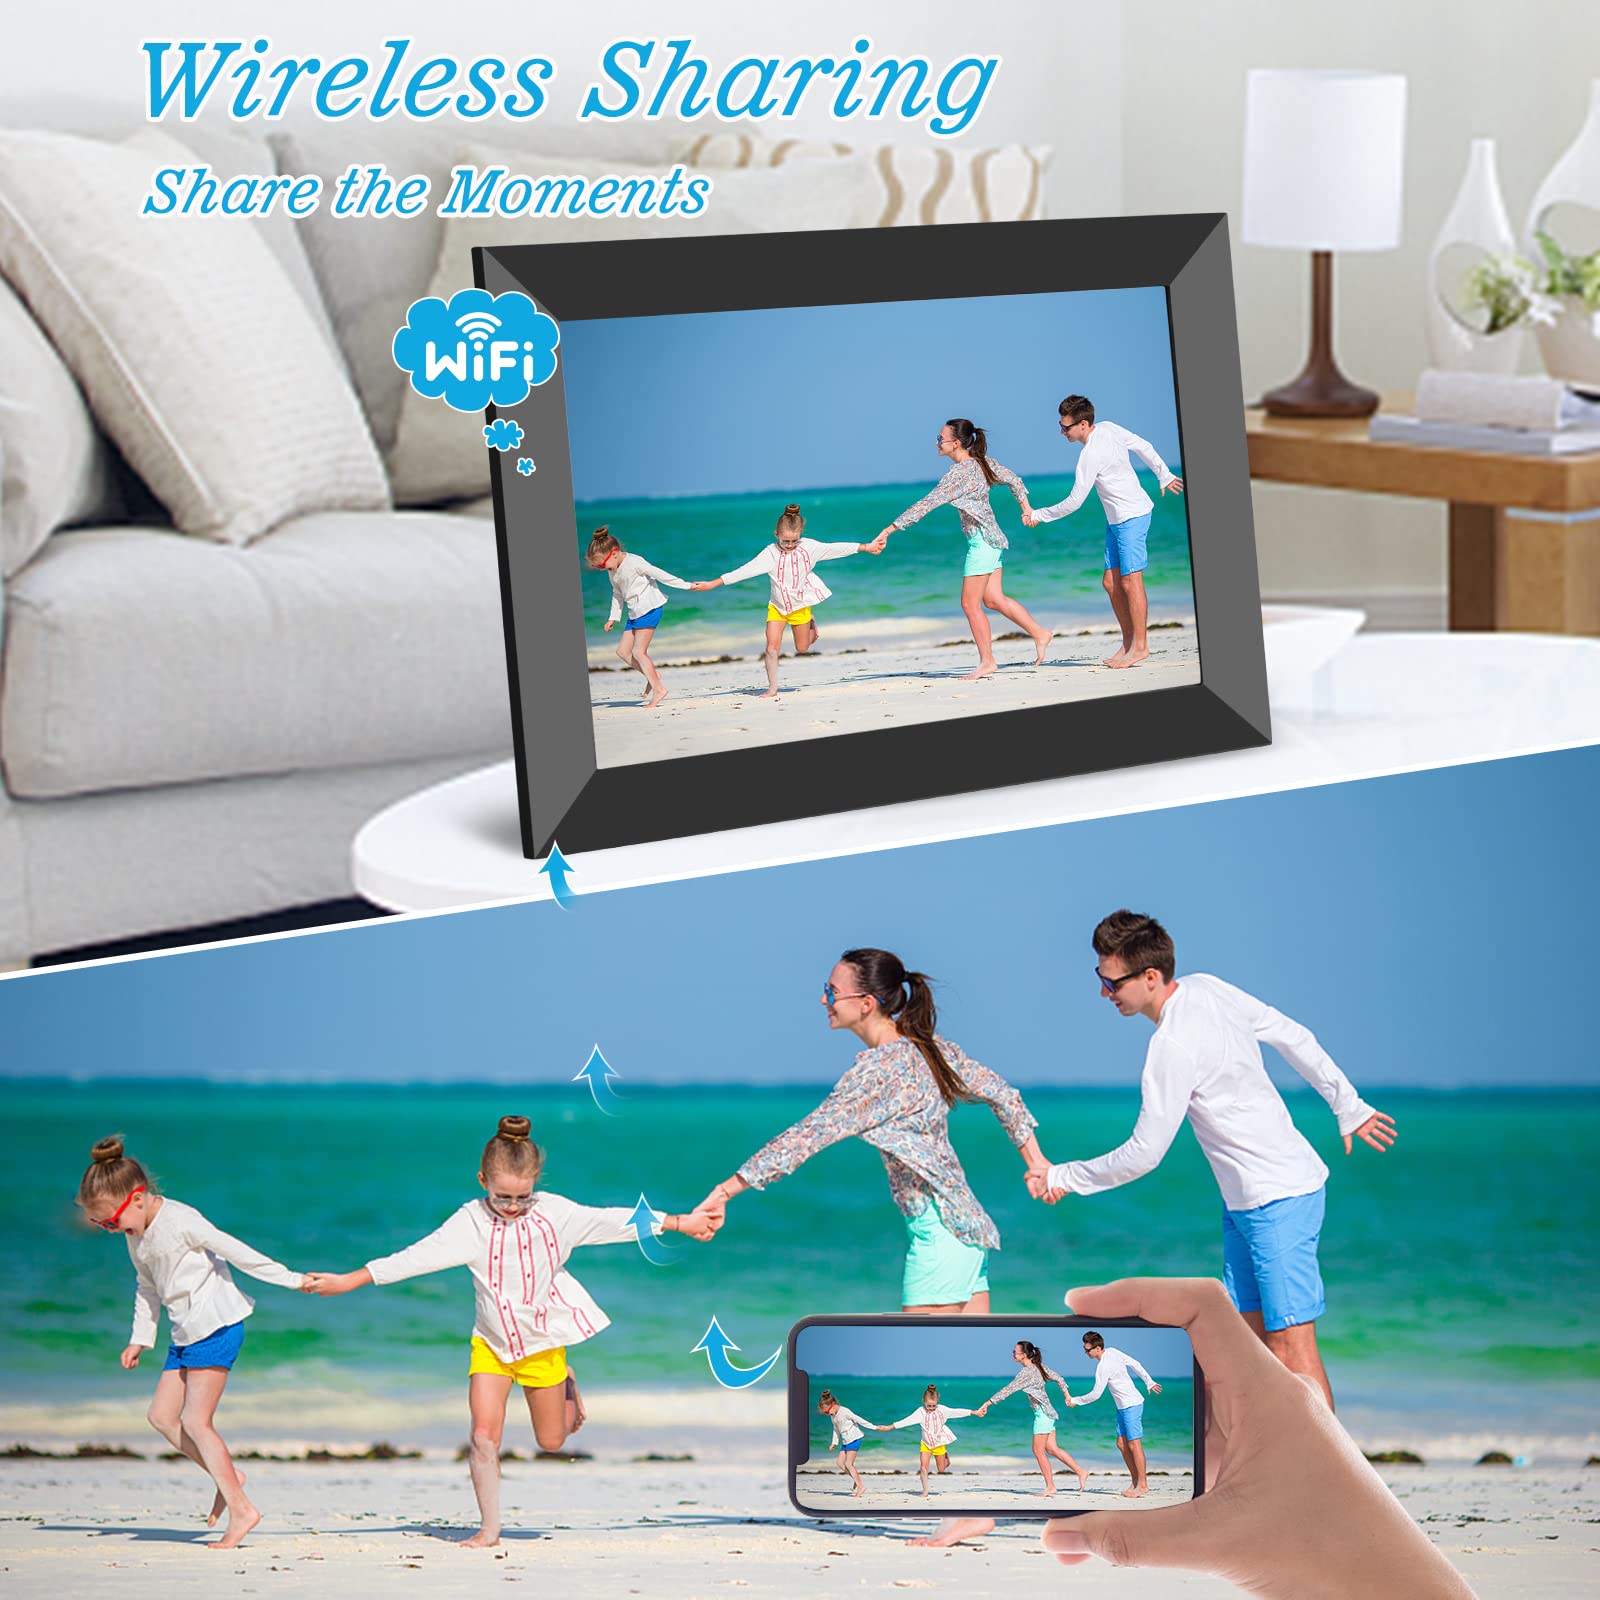 WiFi Digital Picture Frame 10.1 Inch Smart Digital Photo Frame with IPS Touch Screen HD Display, 16GB Storage Easy Setup to Share Photos or Videos Anywhere via Free Frameo APP (Black Frame)